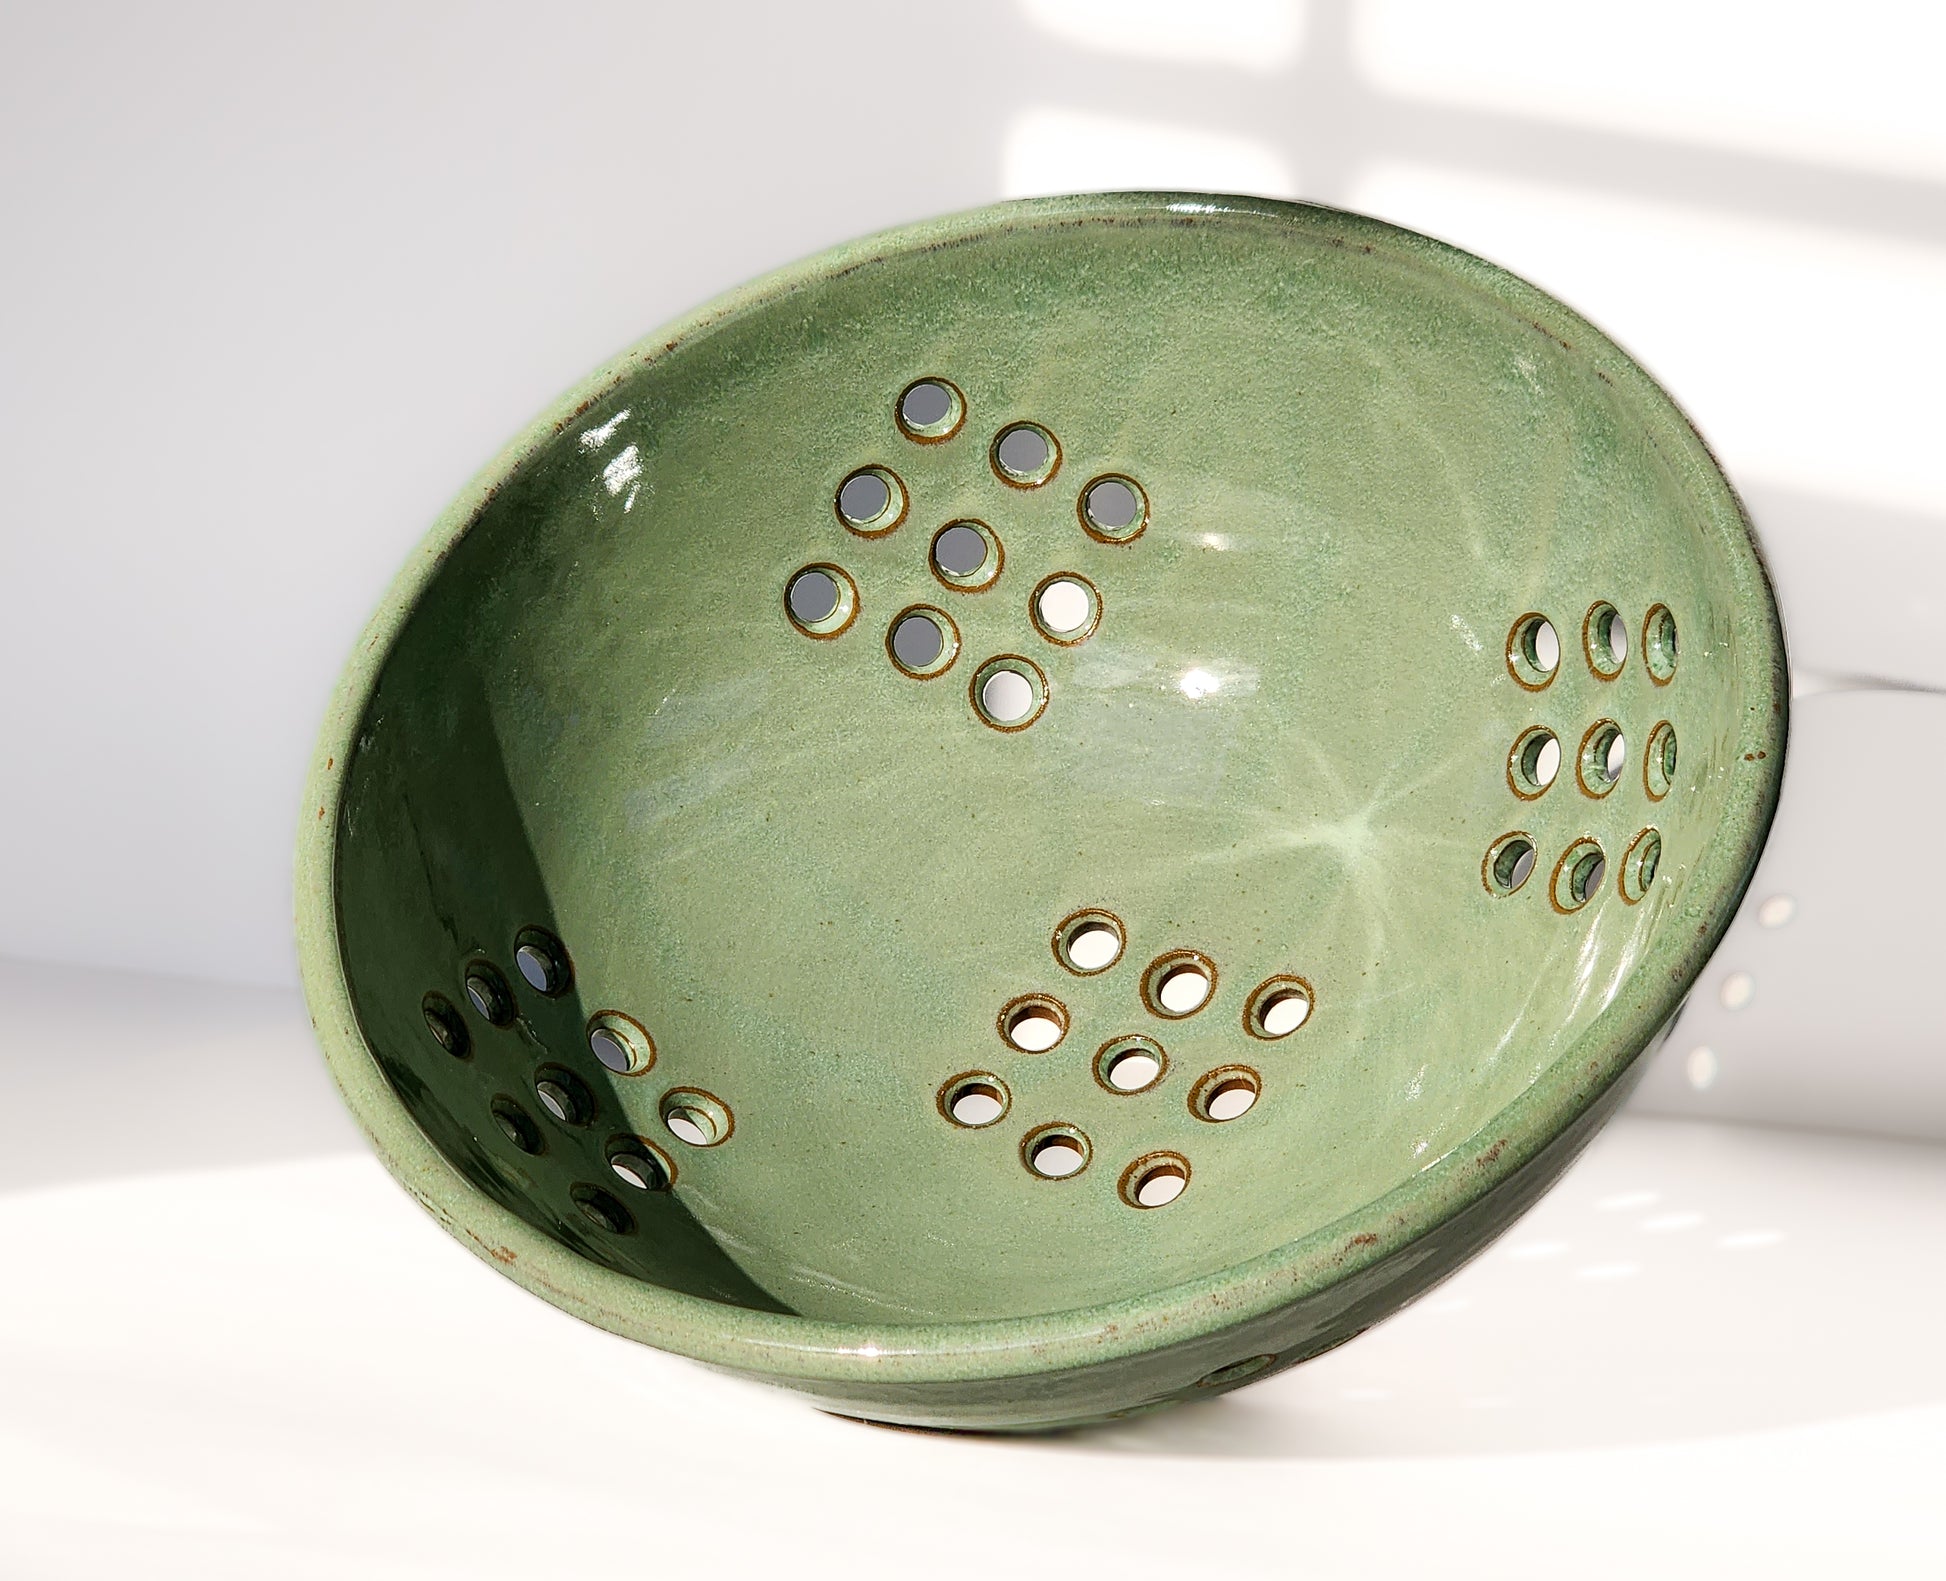 Image: Clinton Pottery's Handmade Large Colander in Light Green – A fresh and practical 12.5 cup colander, expertly crafted. This Light Green piece in a larger size is ideal for washing larger quantities of fruits and vegetables. The vibrant green hue brings a touch of nature's energy to your kitchen routine.